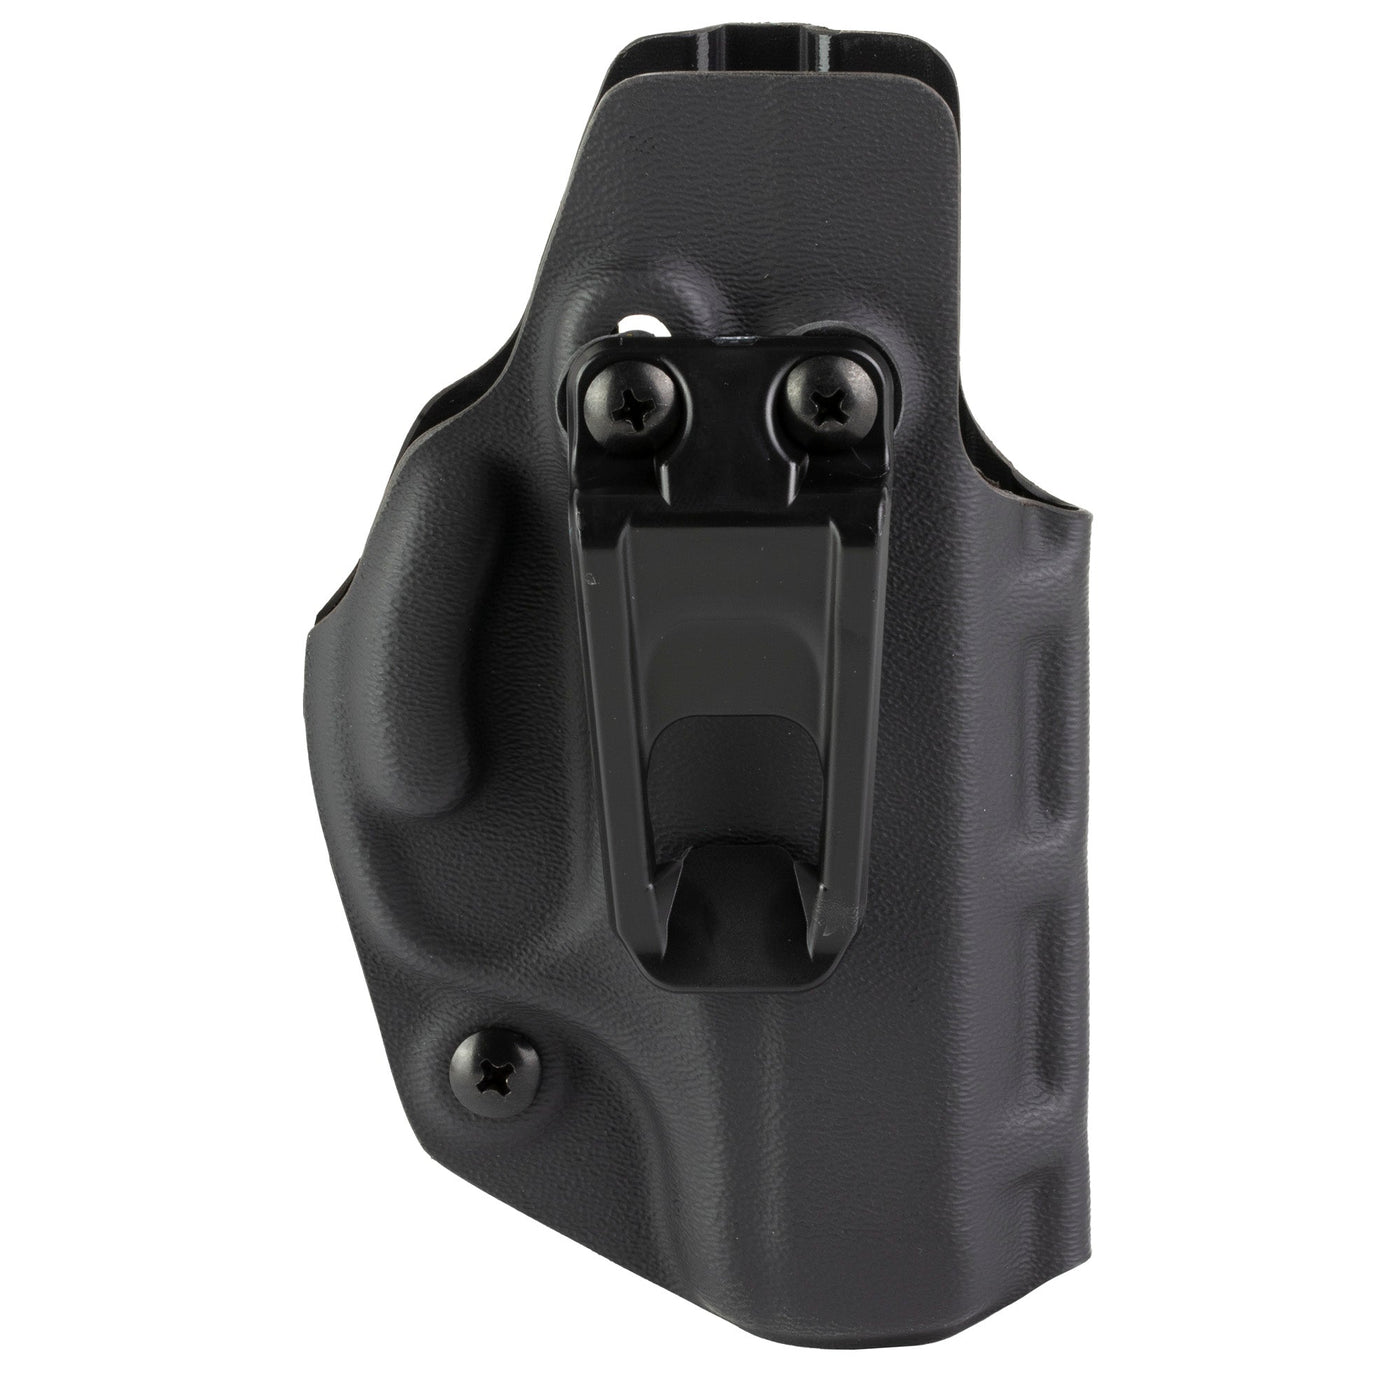 CRUCIAL CONCEALMENT Crucial Iwb For Ruger Lc9/ec9 Firearm Accessories